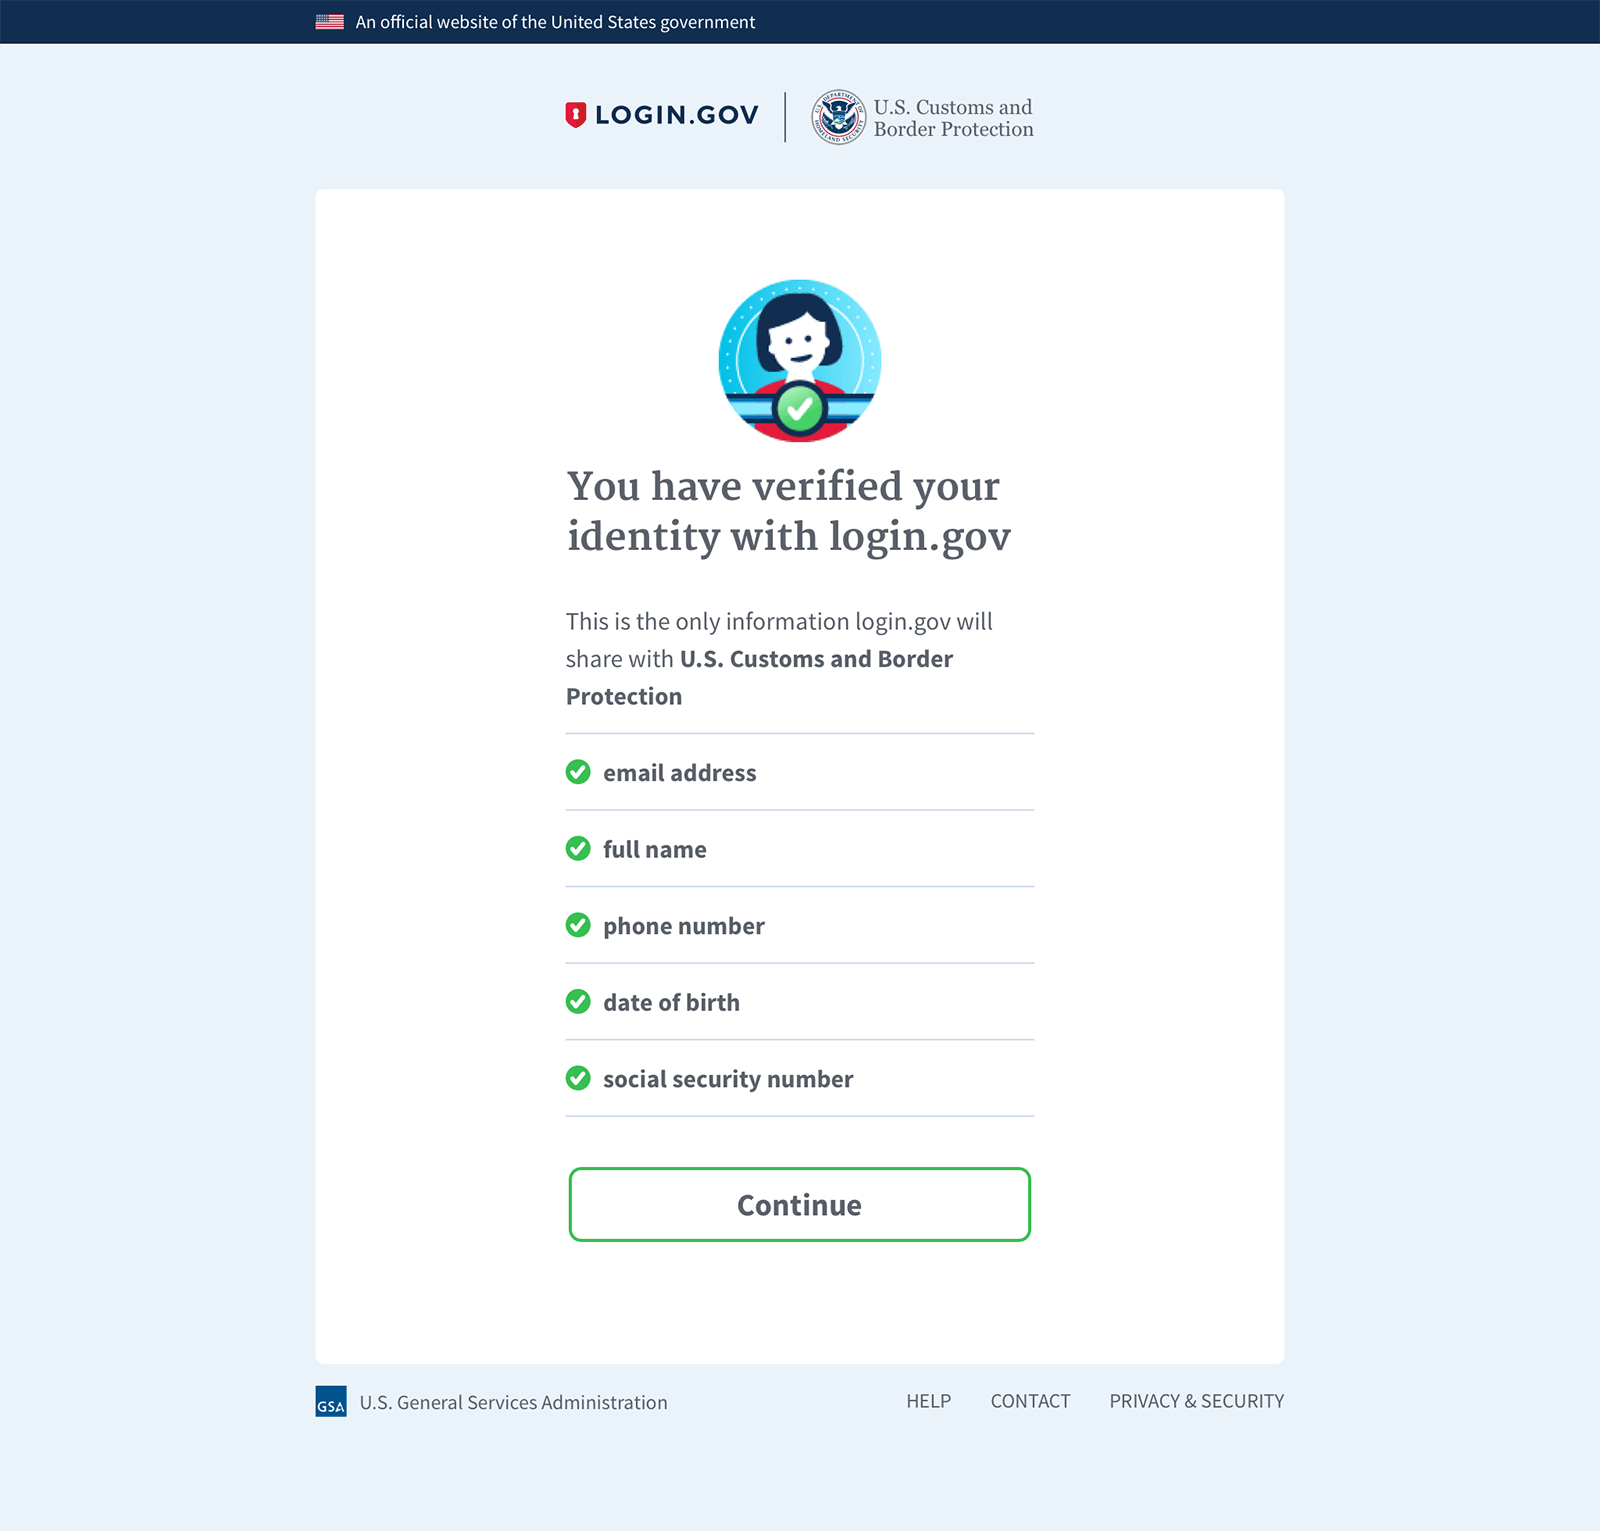 Excerpt page from login.gov account verifcation